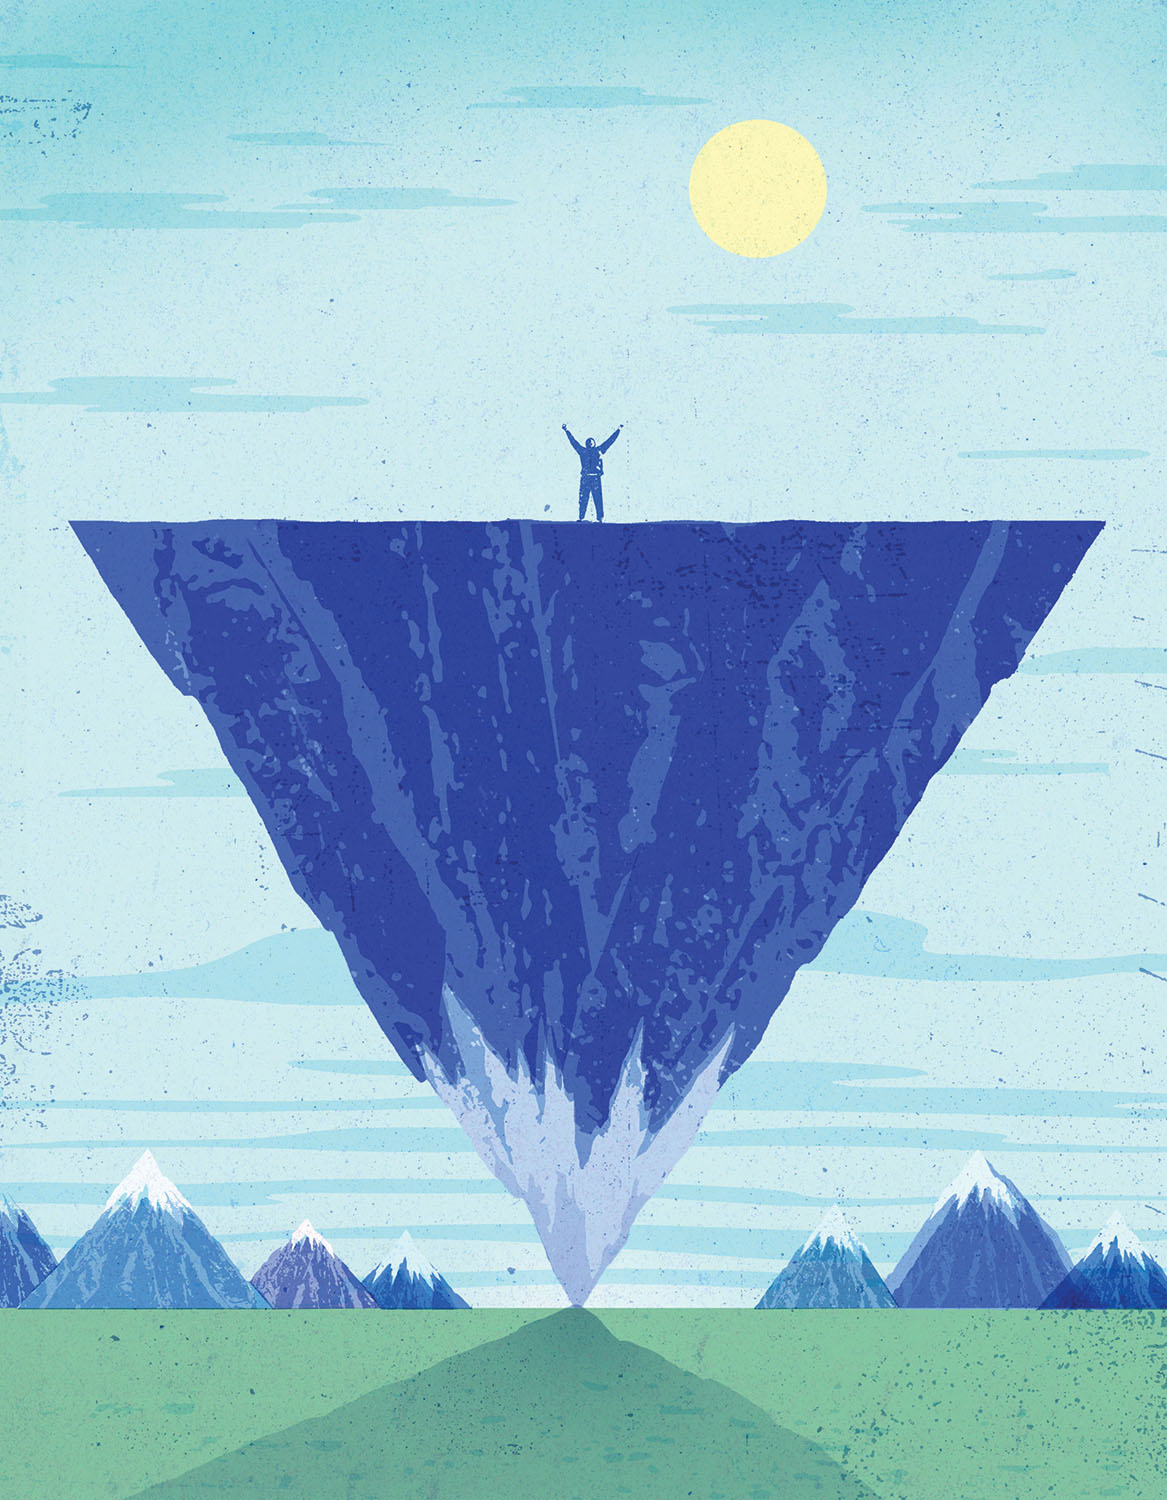 illustration of a man on an upside-down mountain